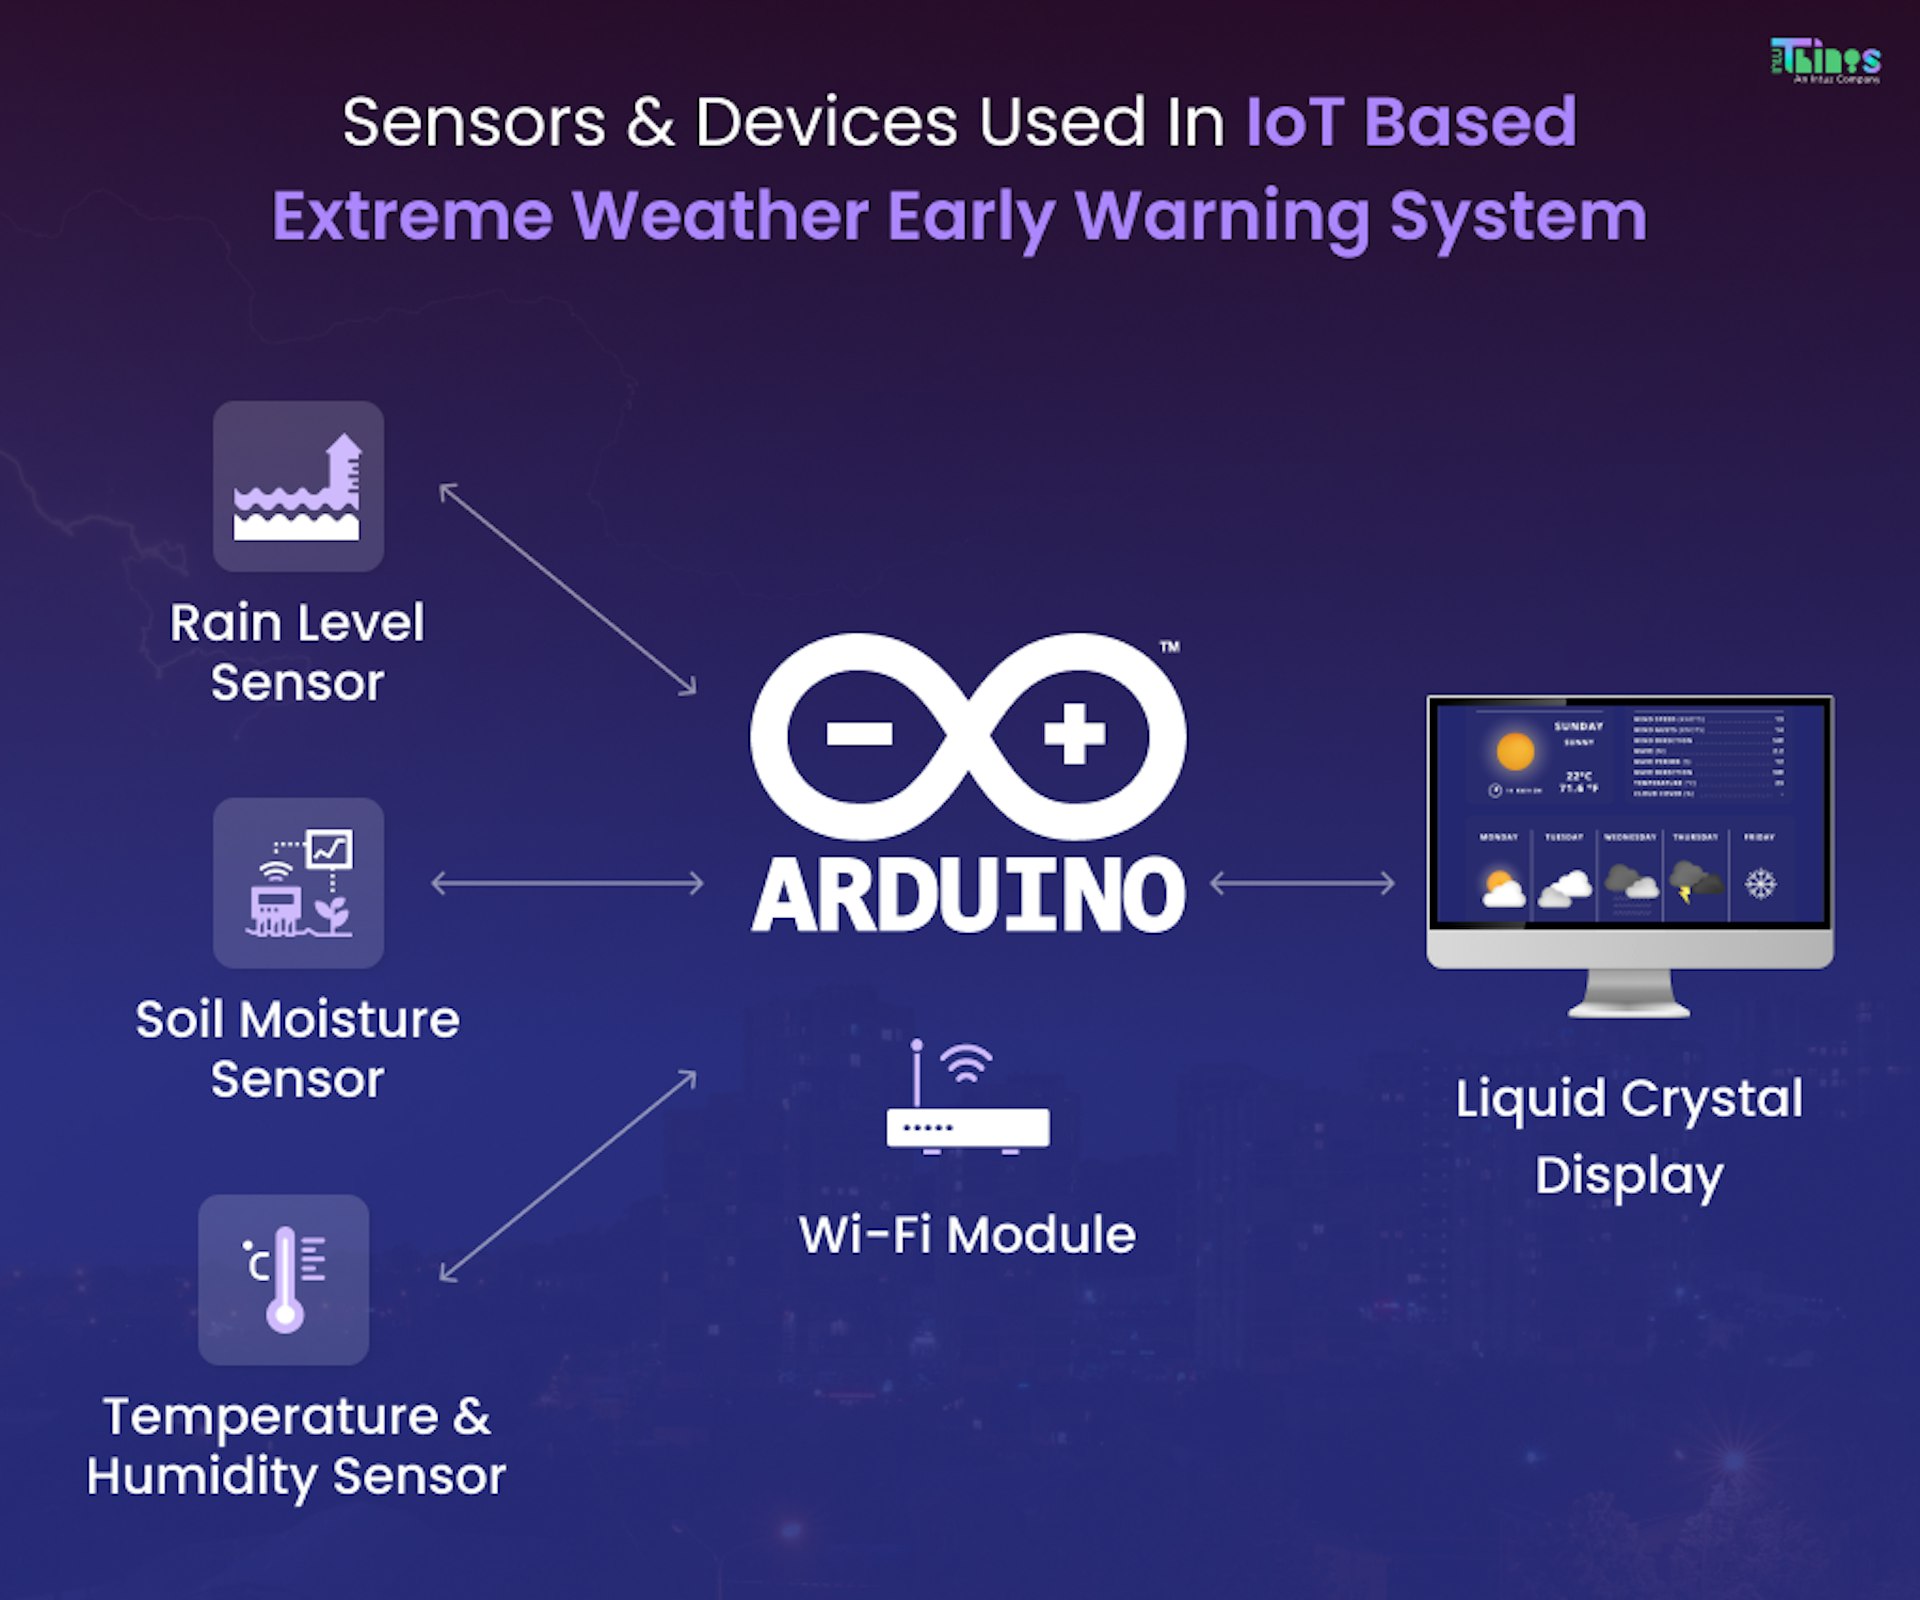 Sensors and devices used in an IoT-based early warning system